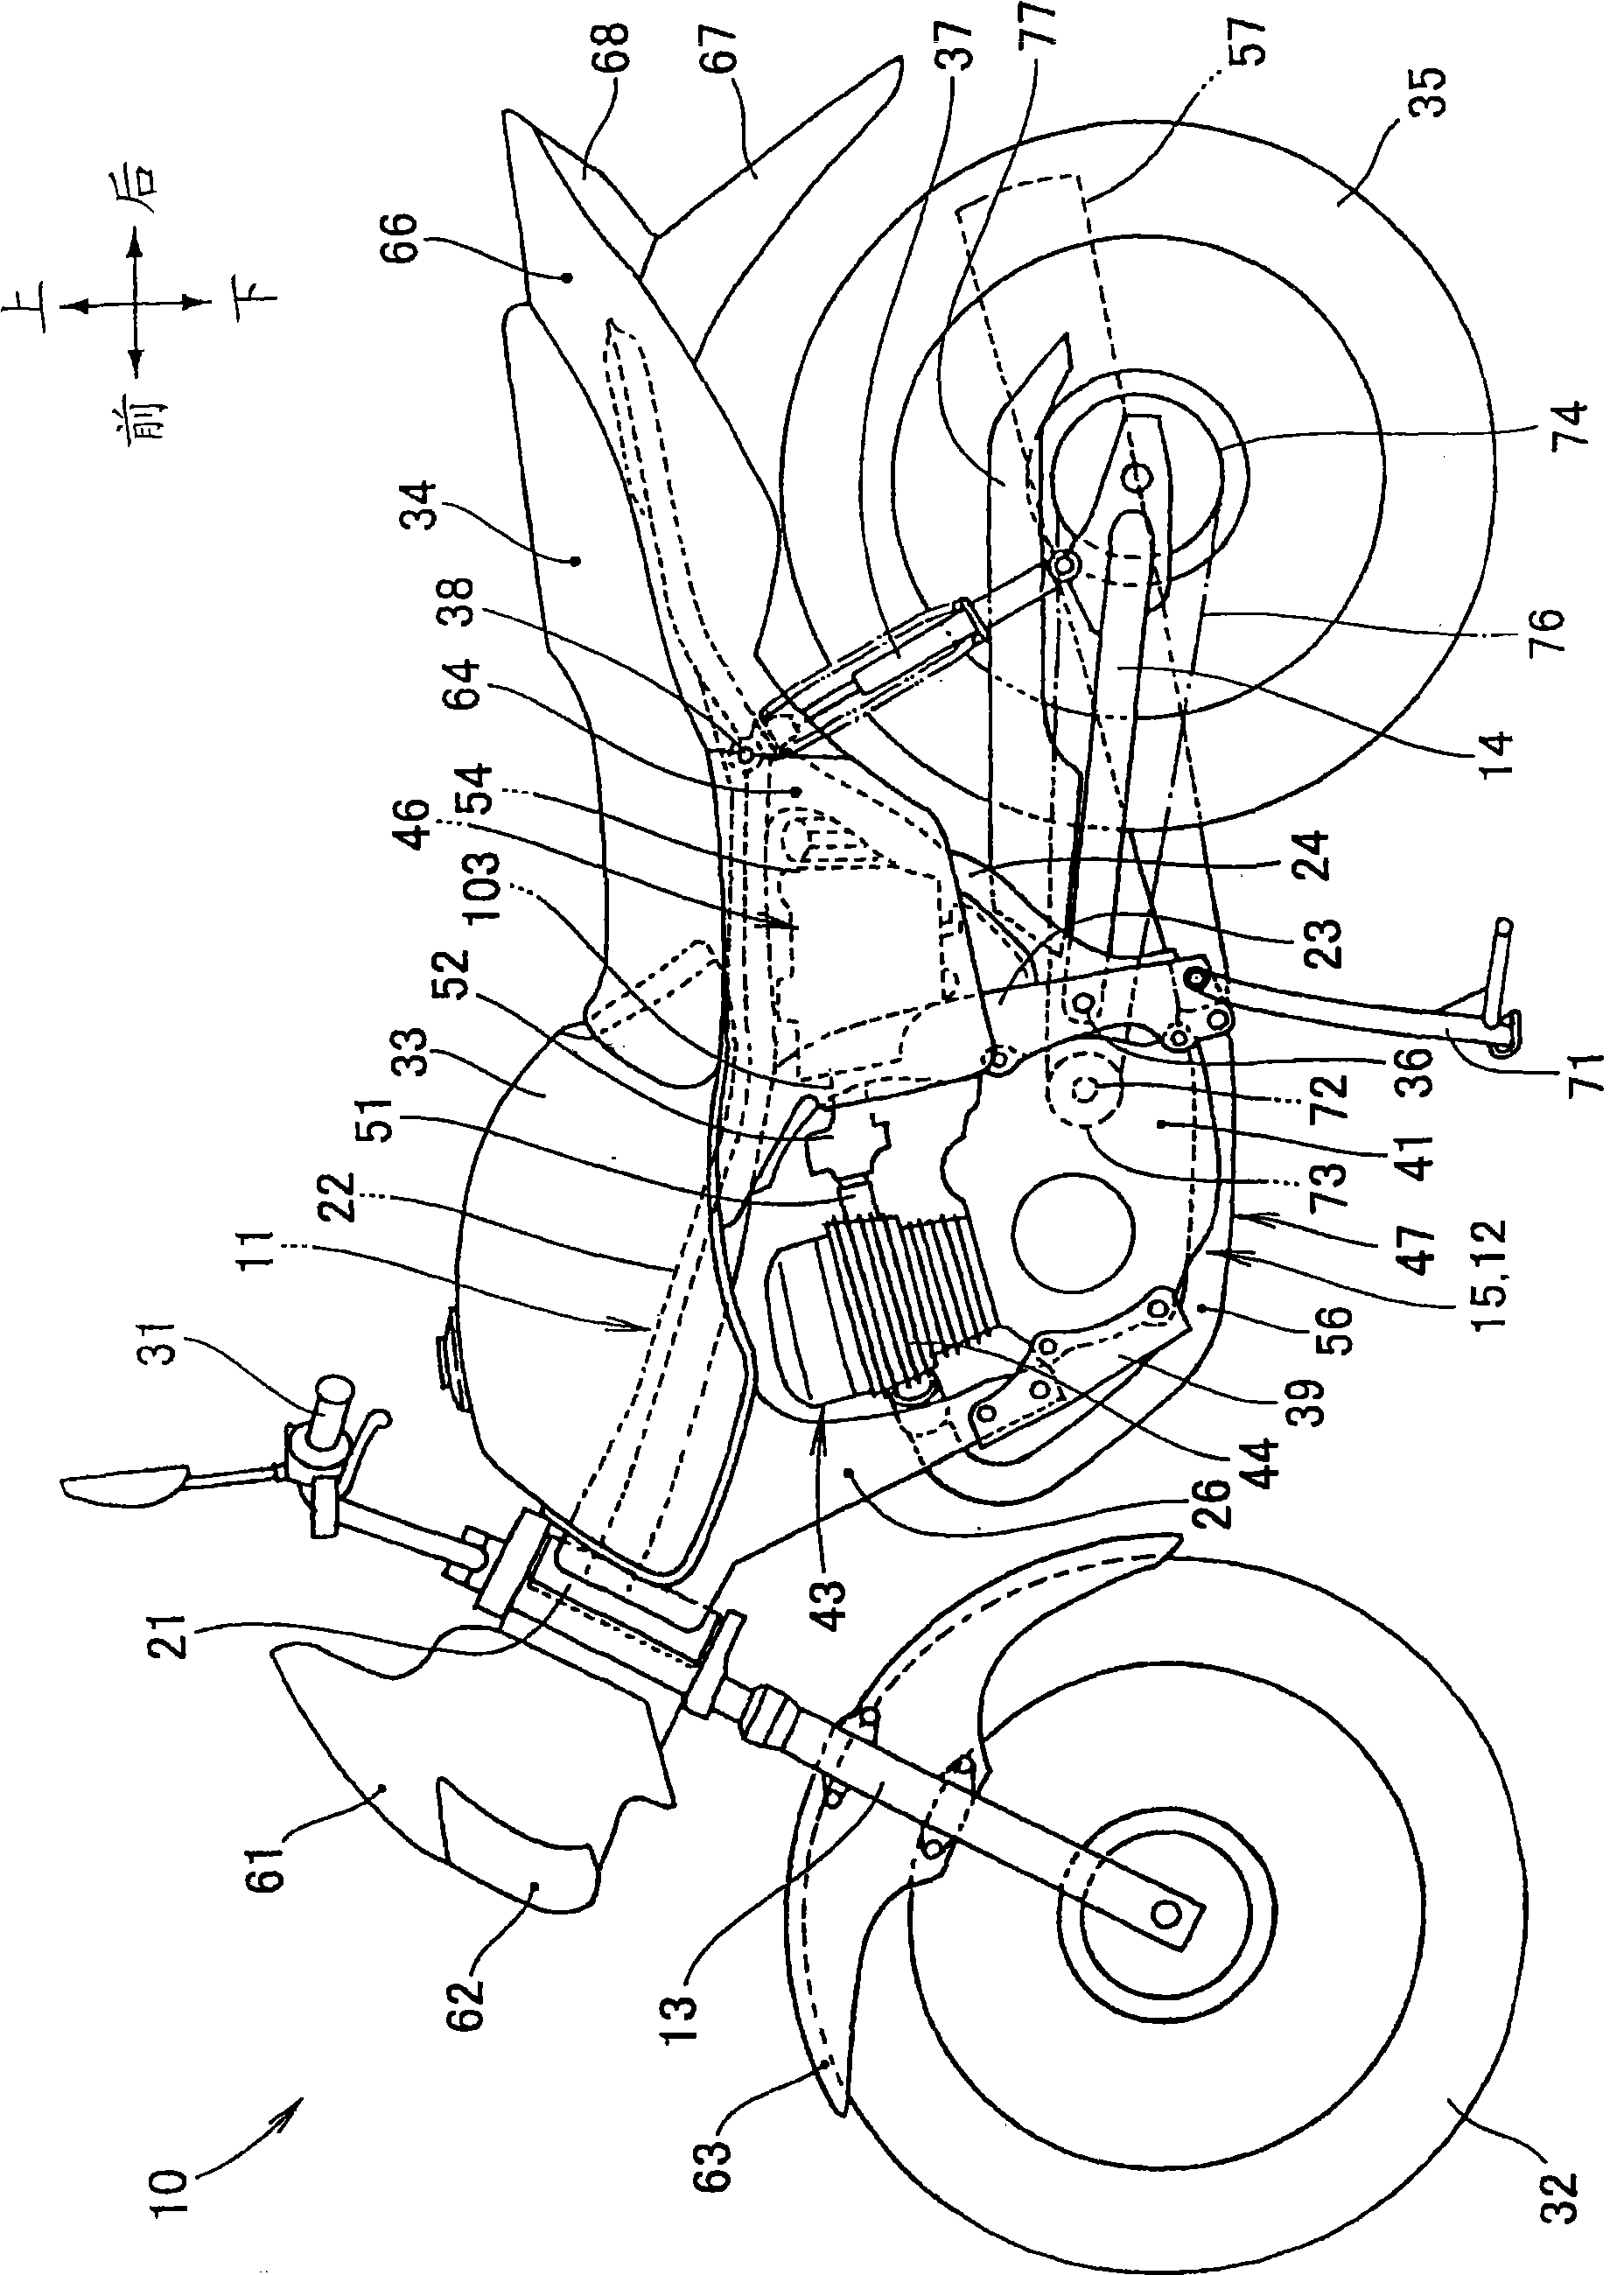 Air feeder structure of internal combustion engine